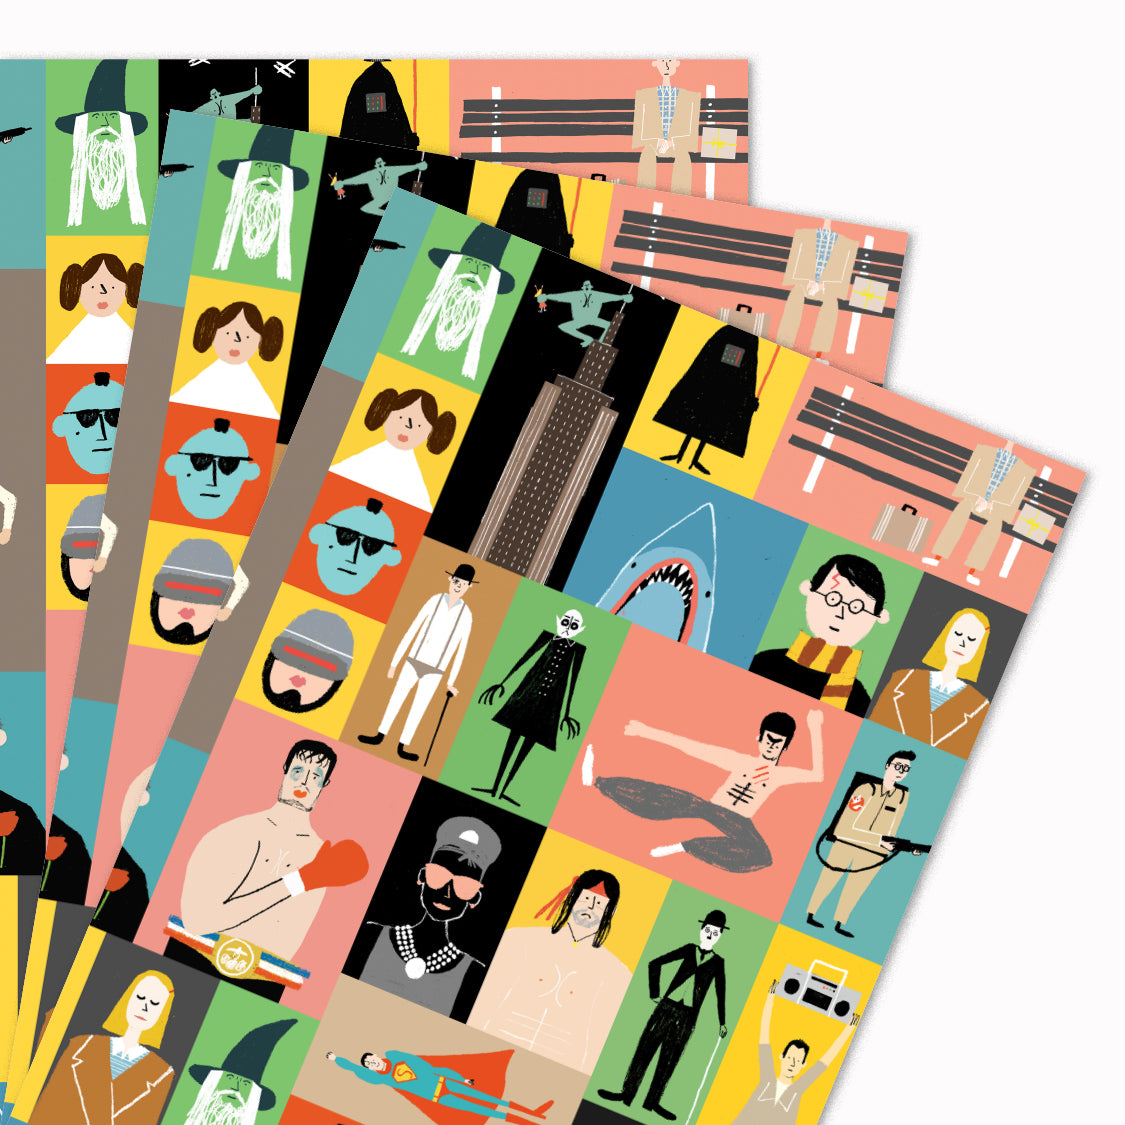 Pack of 3 'Films' gift wrap sheets illustrated by Rob Hodgson for USTUDIO Design. Featuring colourful, graphic interpretations of iconic and classic film characters, this wrapping paper design is perfect for movie buffs!